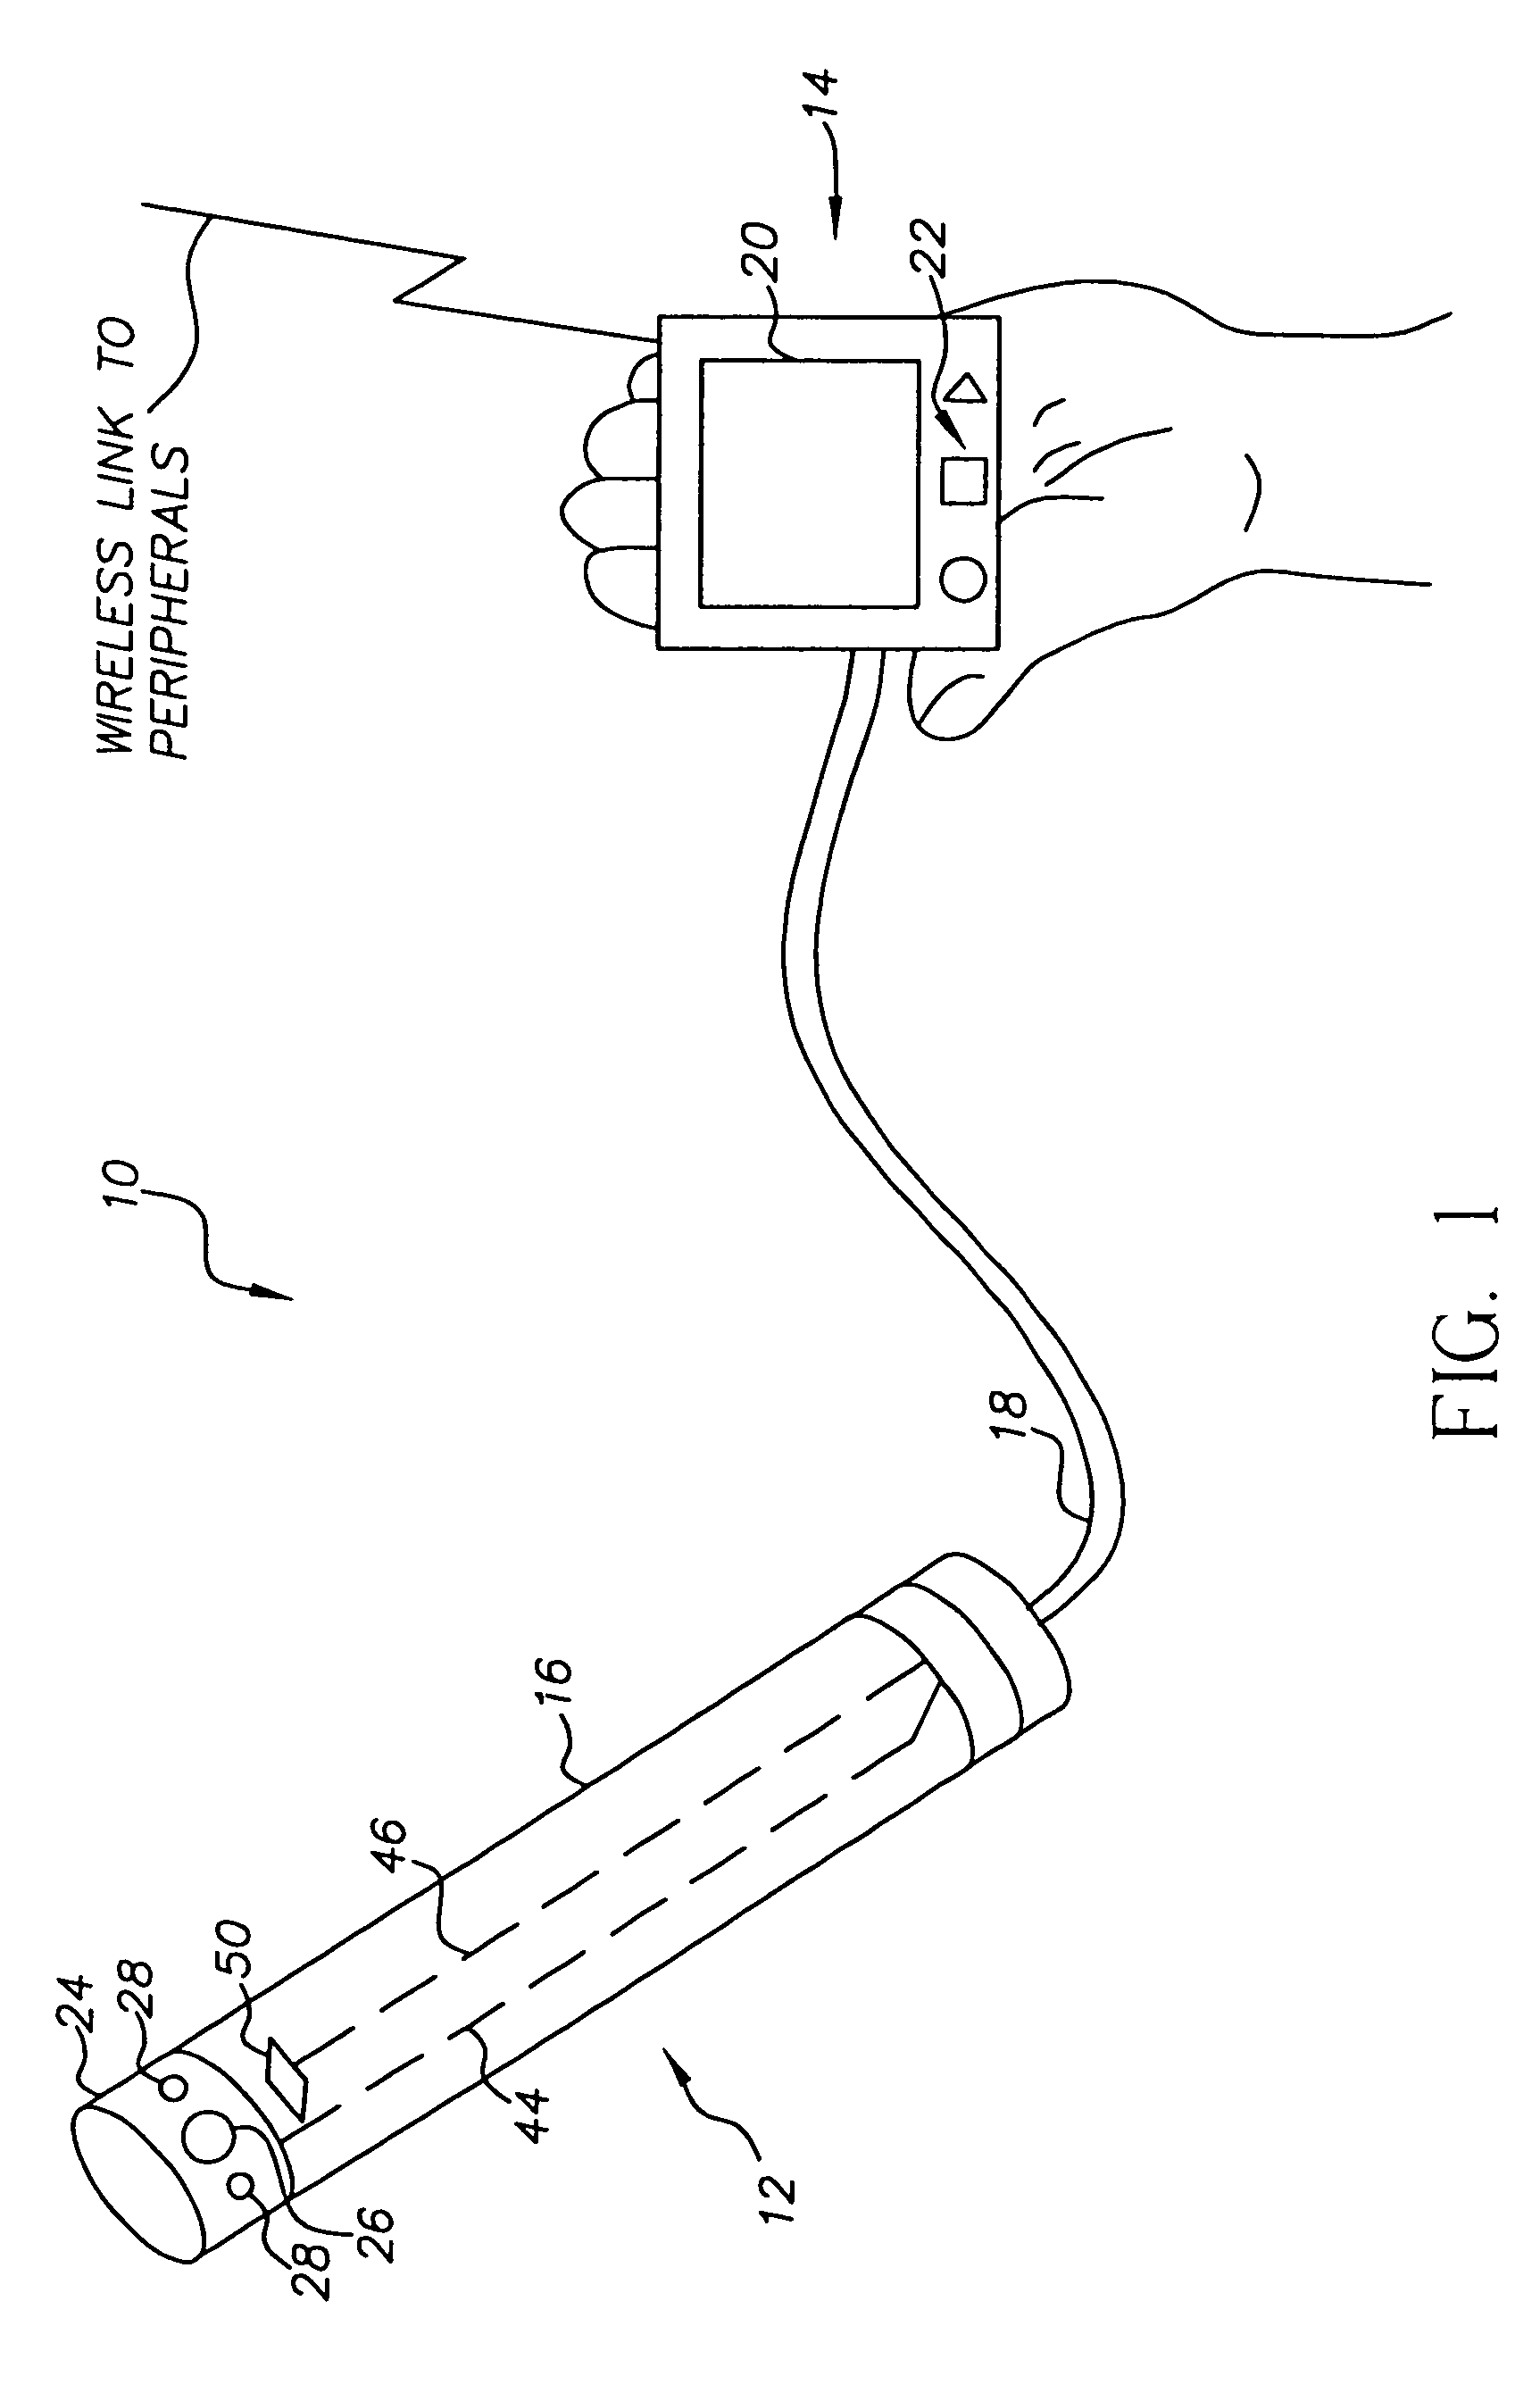 Intra-oral camera system with chair-mounted display